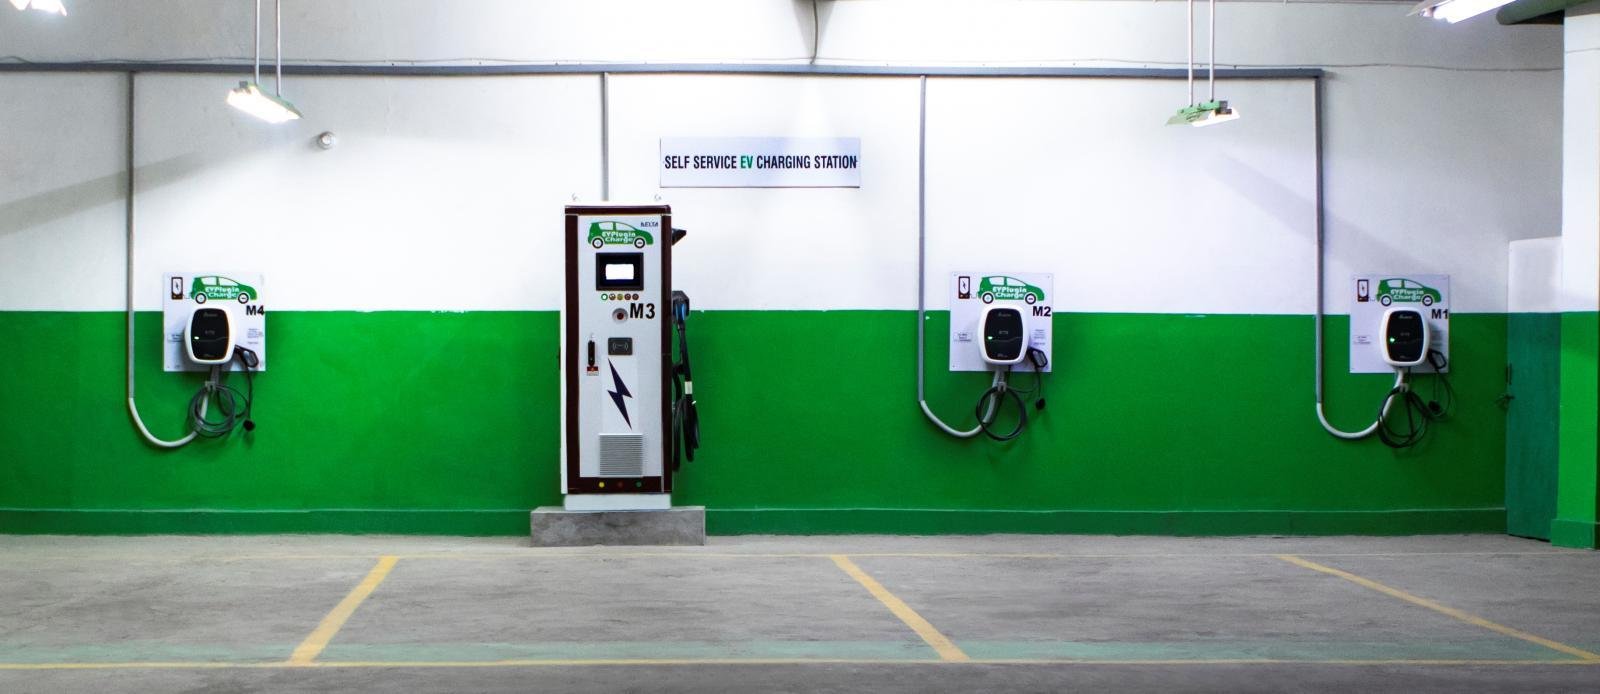 Delhi Government Directs Hotels And Malls To Reserve 5% Parking For EVs